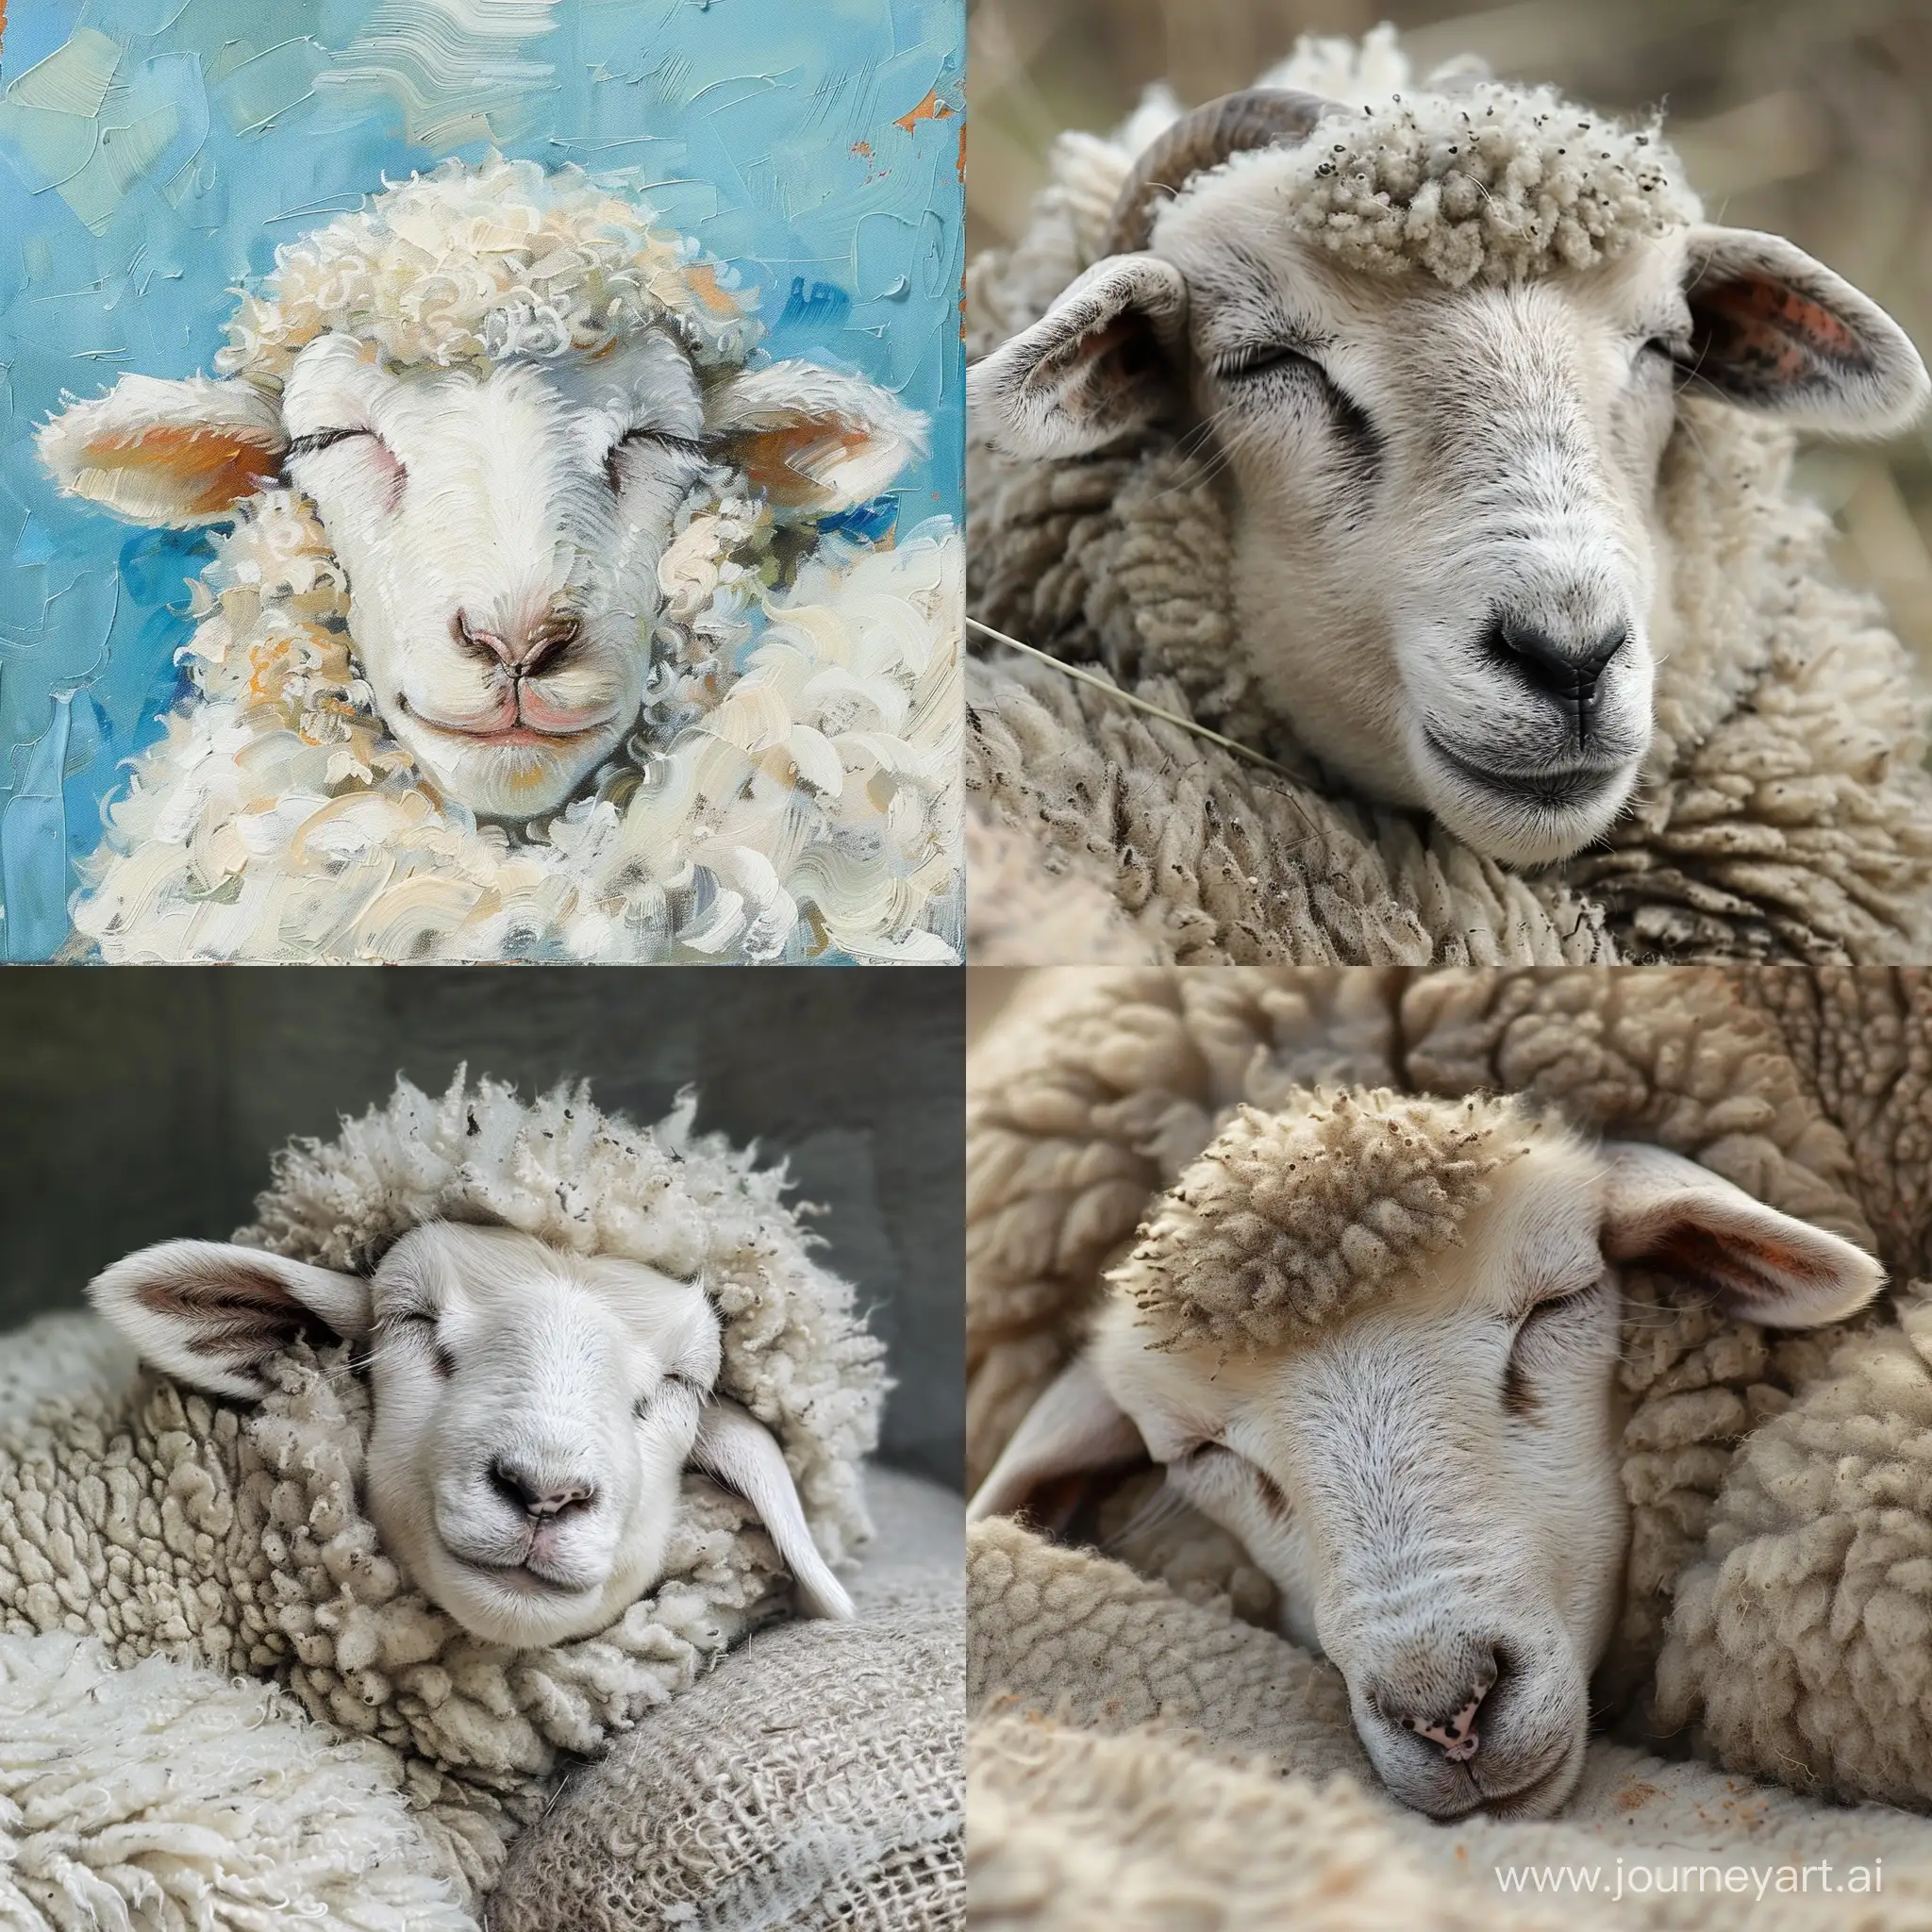 Peaceful-Sleep-of-a-Contented-Sheep